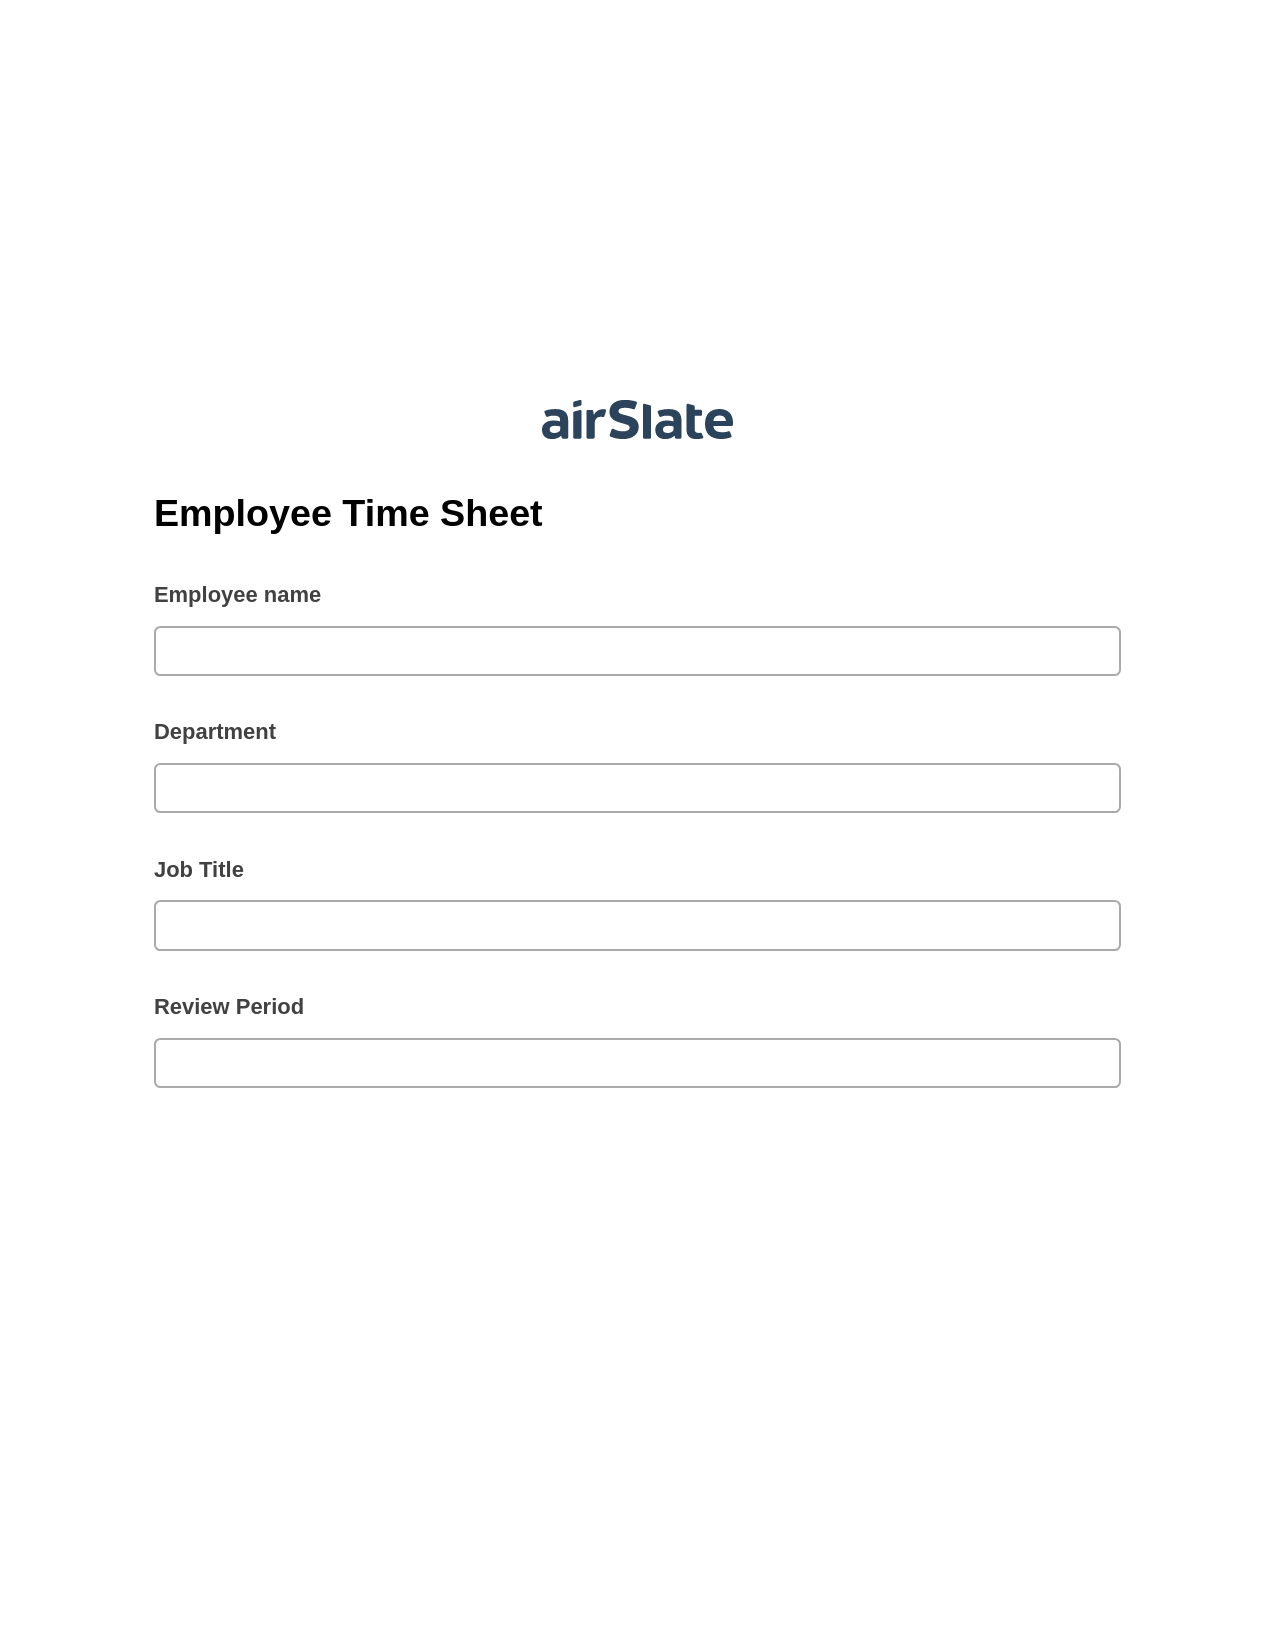 Employee Time Sheet Pre-fill from Excel Spreadsheet Bot, Update Audit Trail Bot, Export to Google Sheet Bot